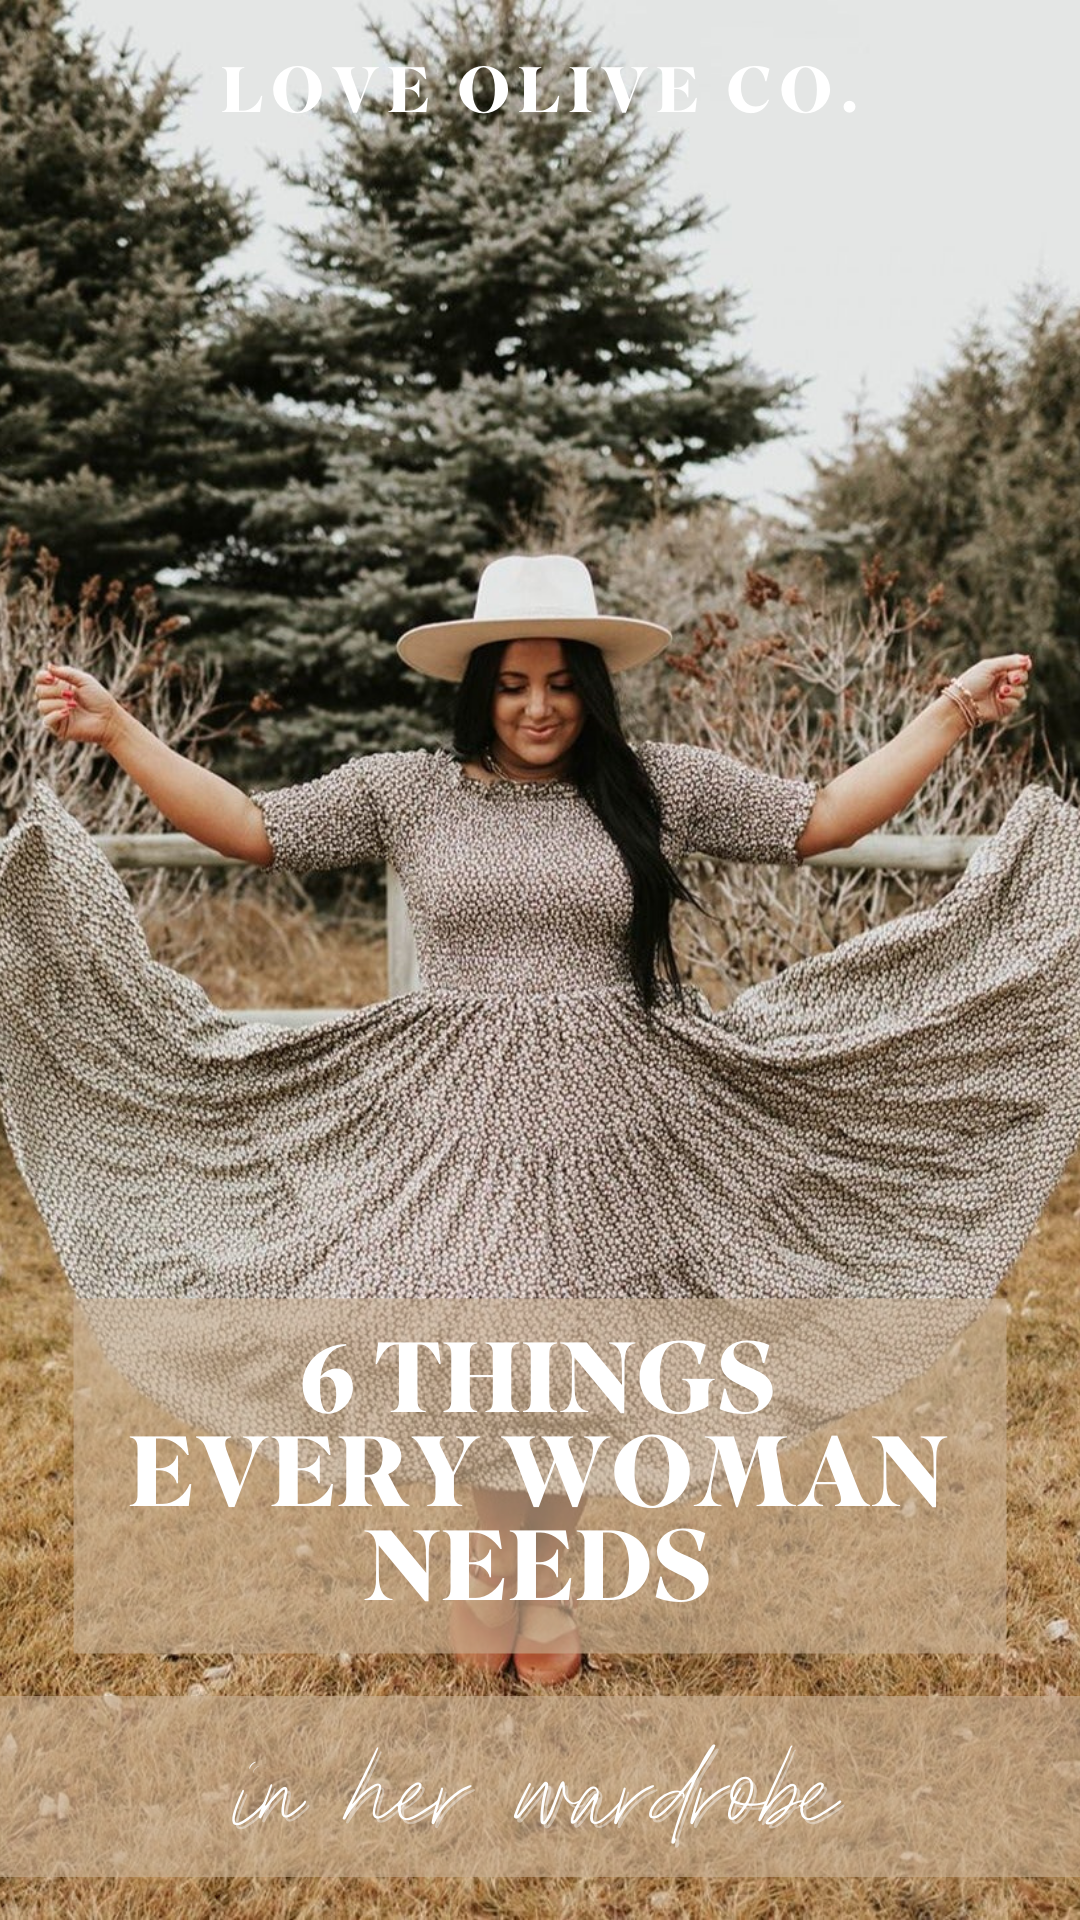 6 things every woman needs in her wardrobe. www.loveoliveco.com